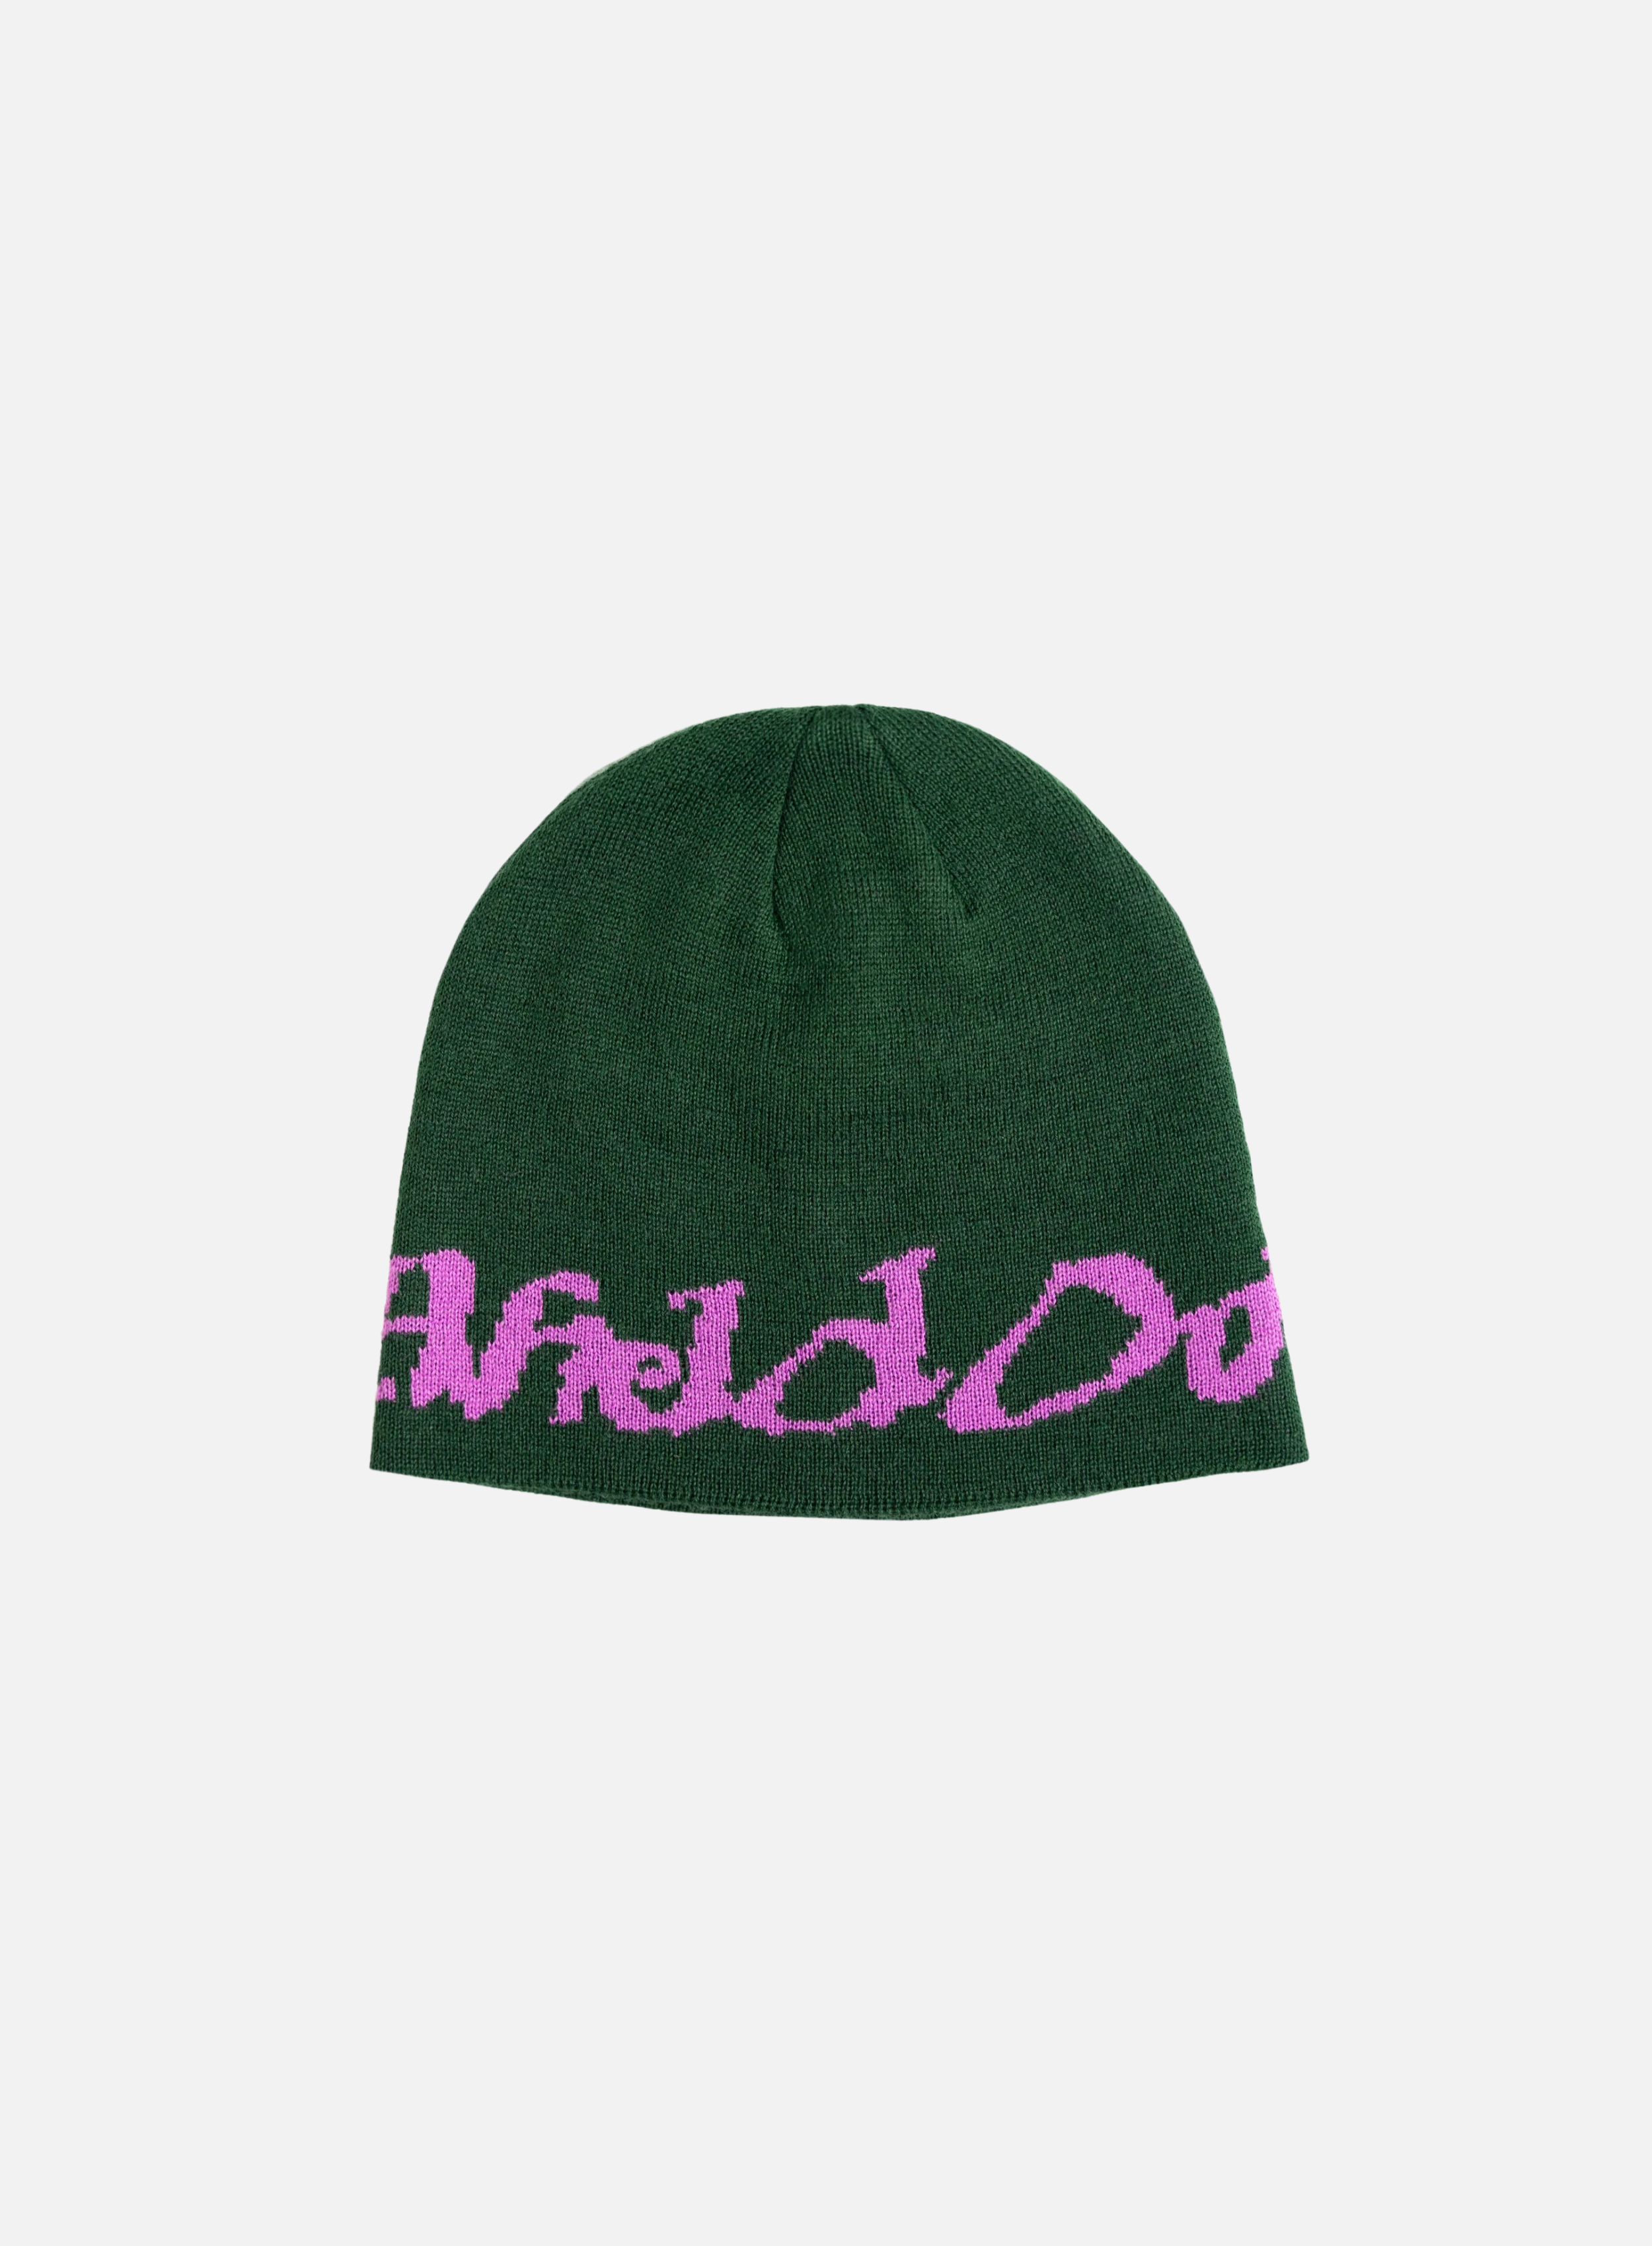 28. Afield Out Speedmark Beanie (Green).png